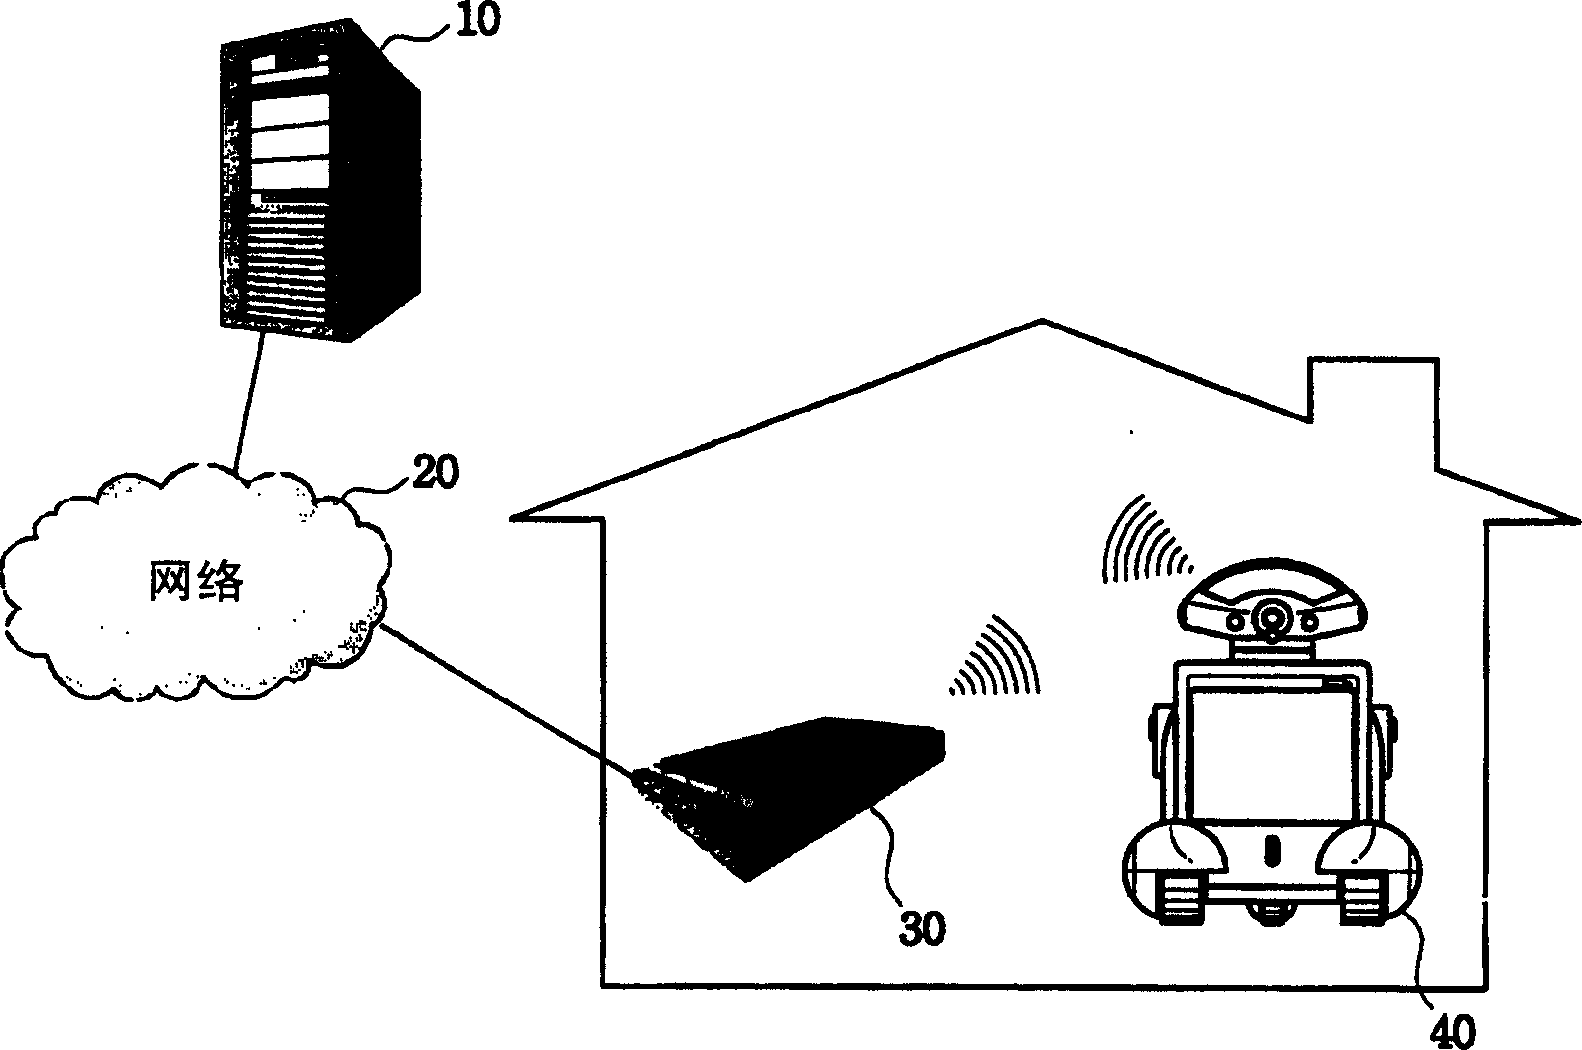 Home robot using supercomputer, and home network system having the same